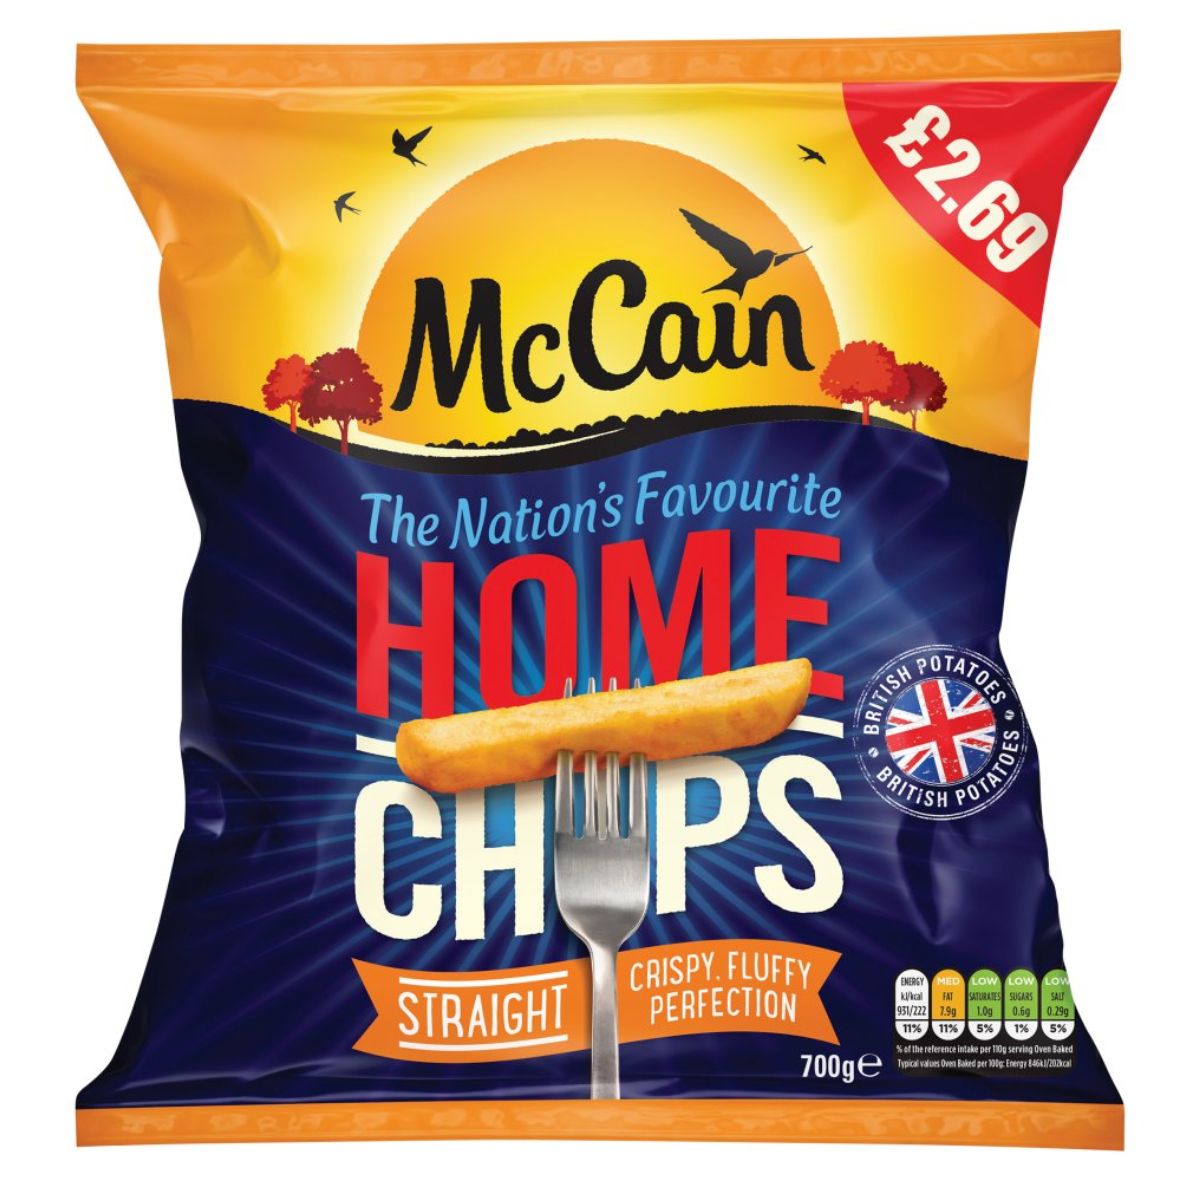 McCain - Home Chips Straight - 700g in a bag with a british flag on it.